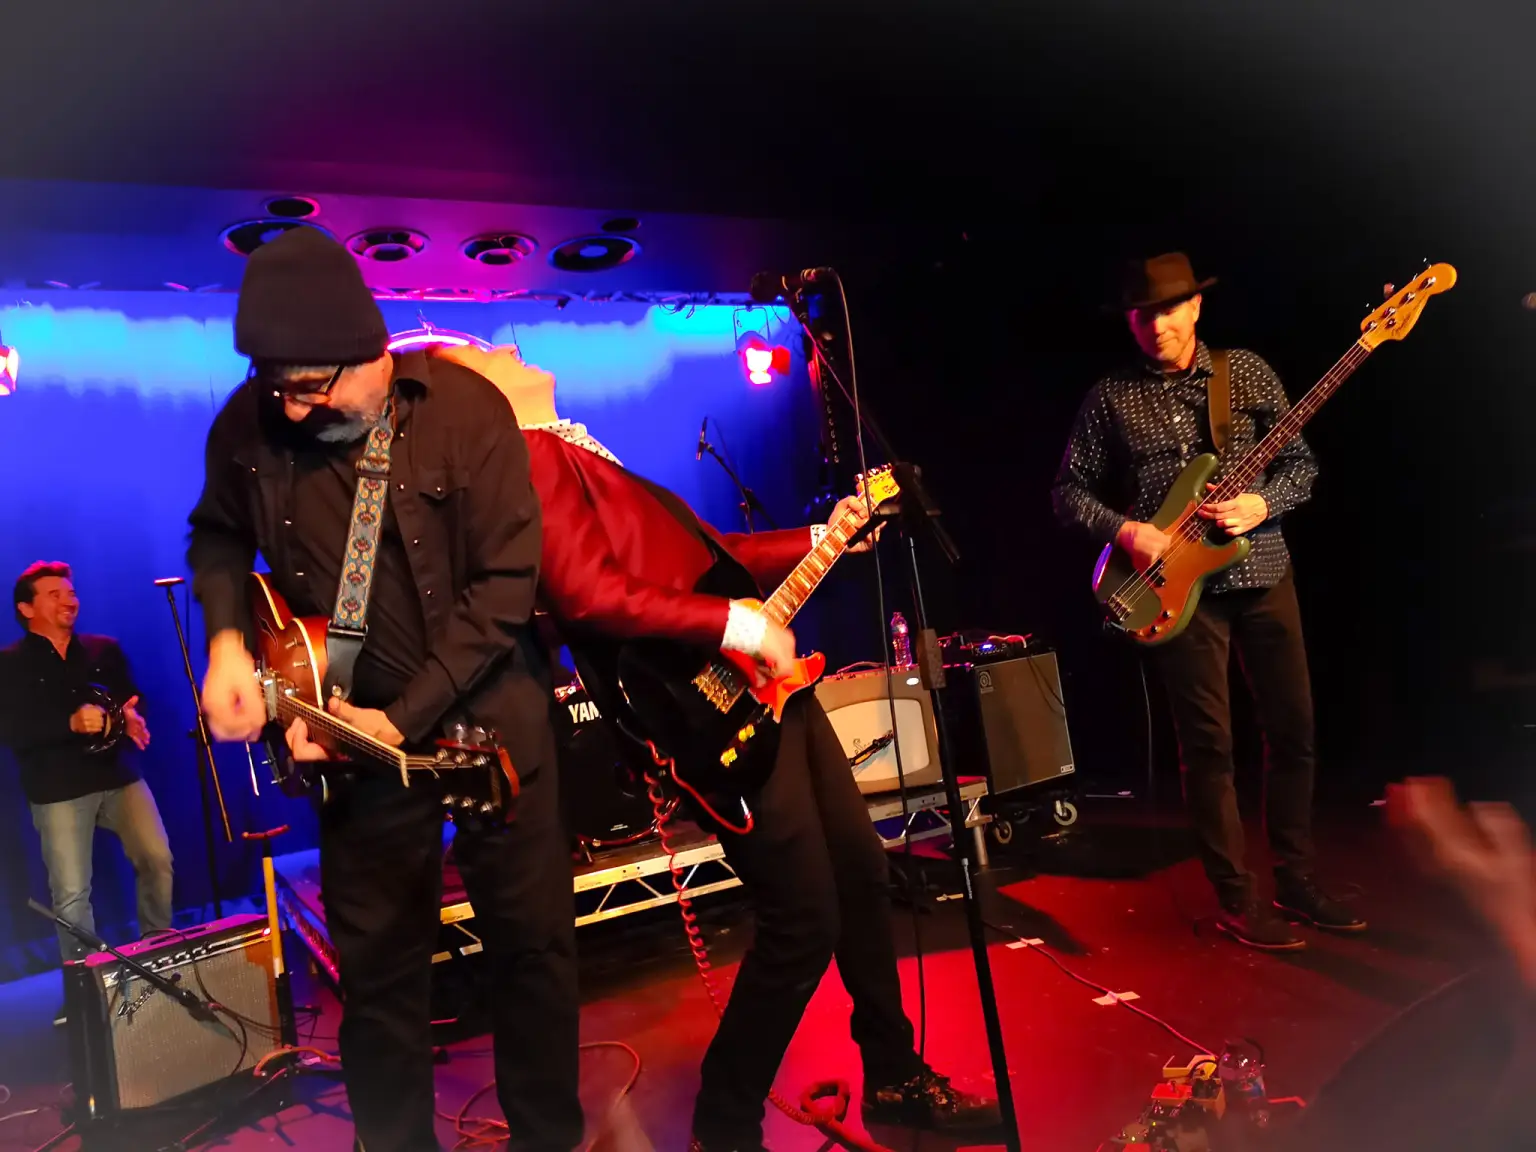 Guitarist in red coat and black slacks leaning up against guitarist Matt Piucci in all black with rest of band performing in background with red light on stage floor and blue and purple lighting behind them.